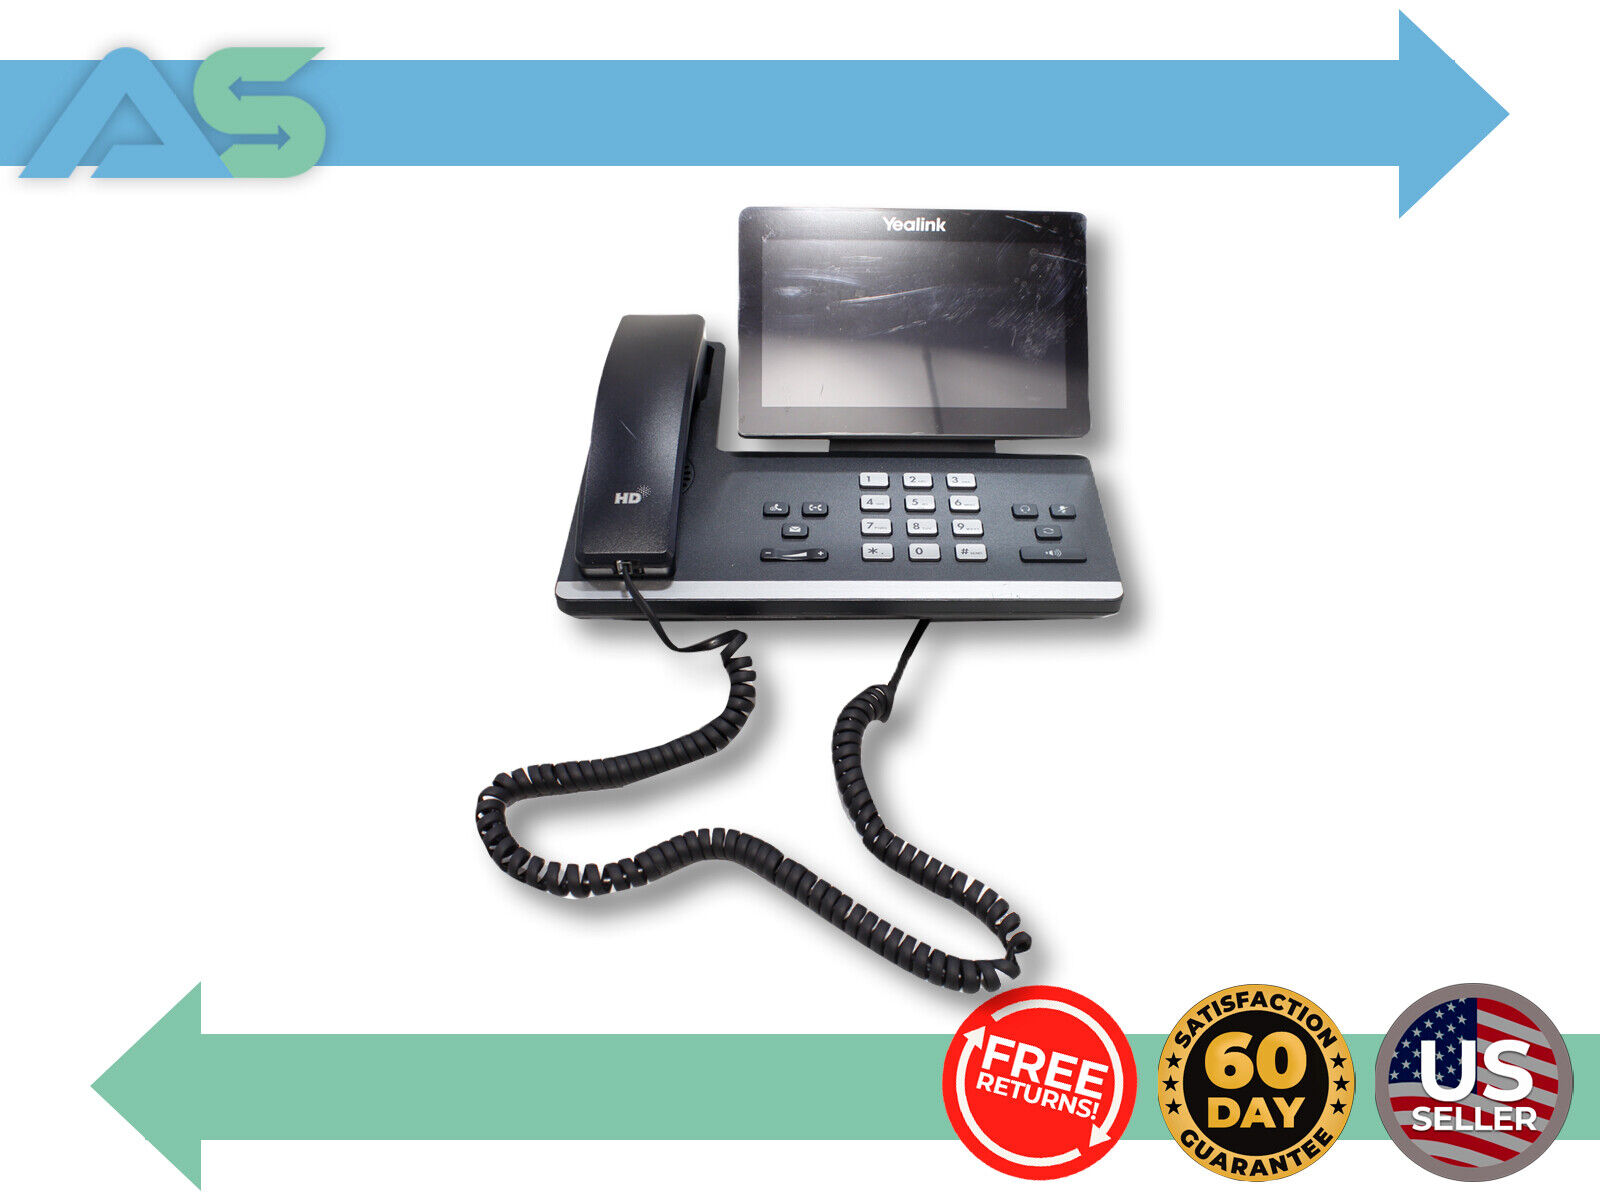 Yealink SIP-T57W Premium IP Phone Touchscreen w/ built-in Bluetooth and Wi-Fi